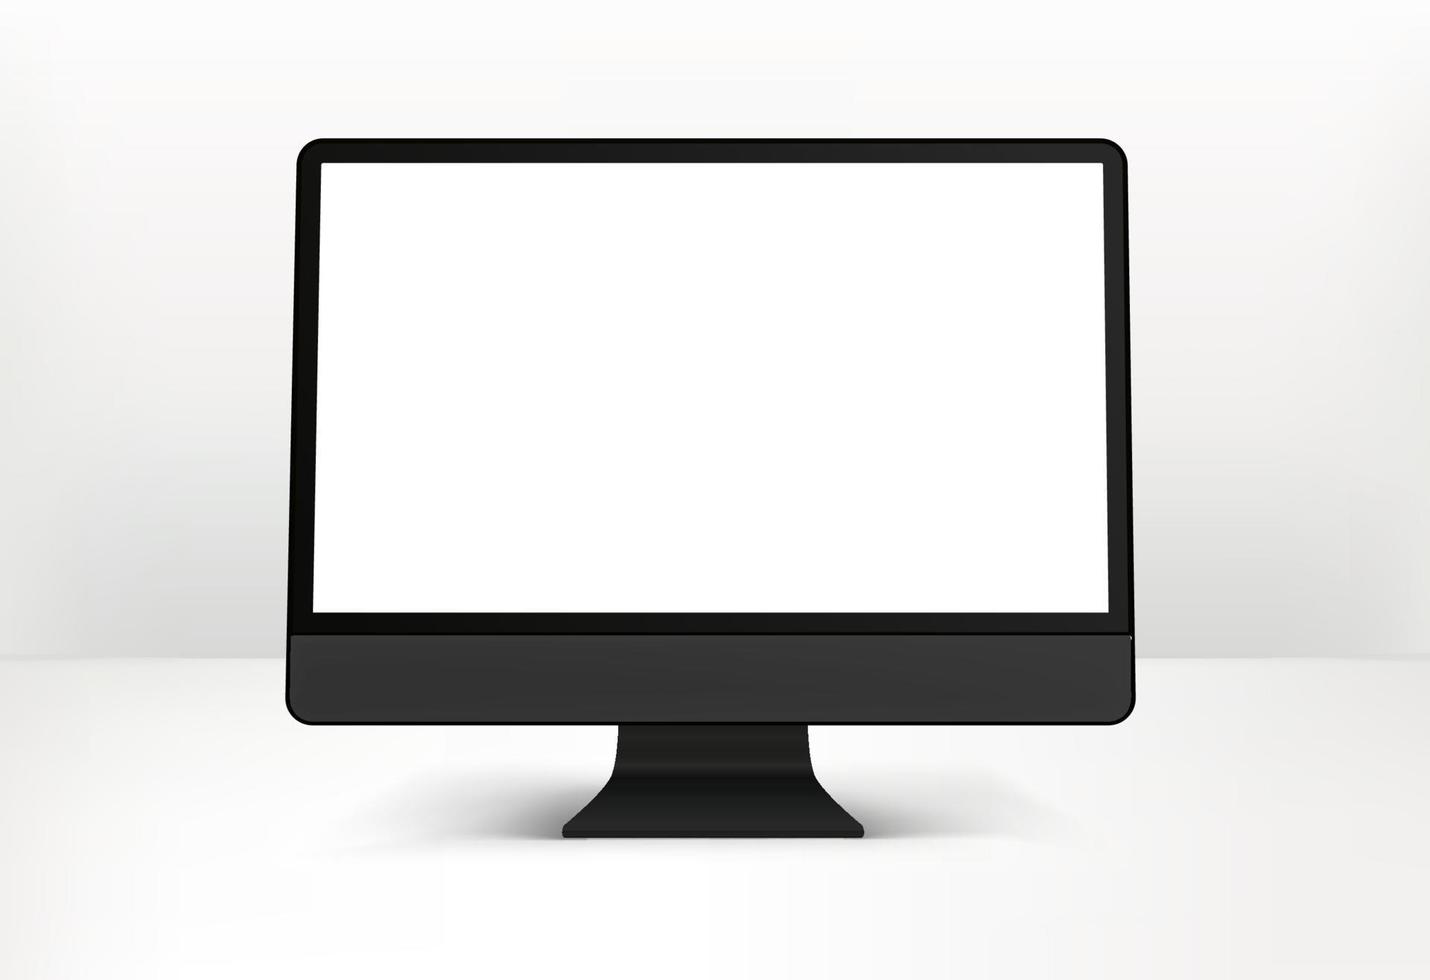 Black personal computer isolated on bright background. Realistic and detailed mockup vector